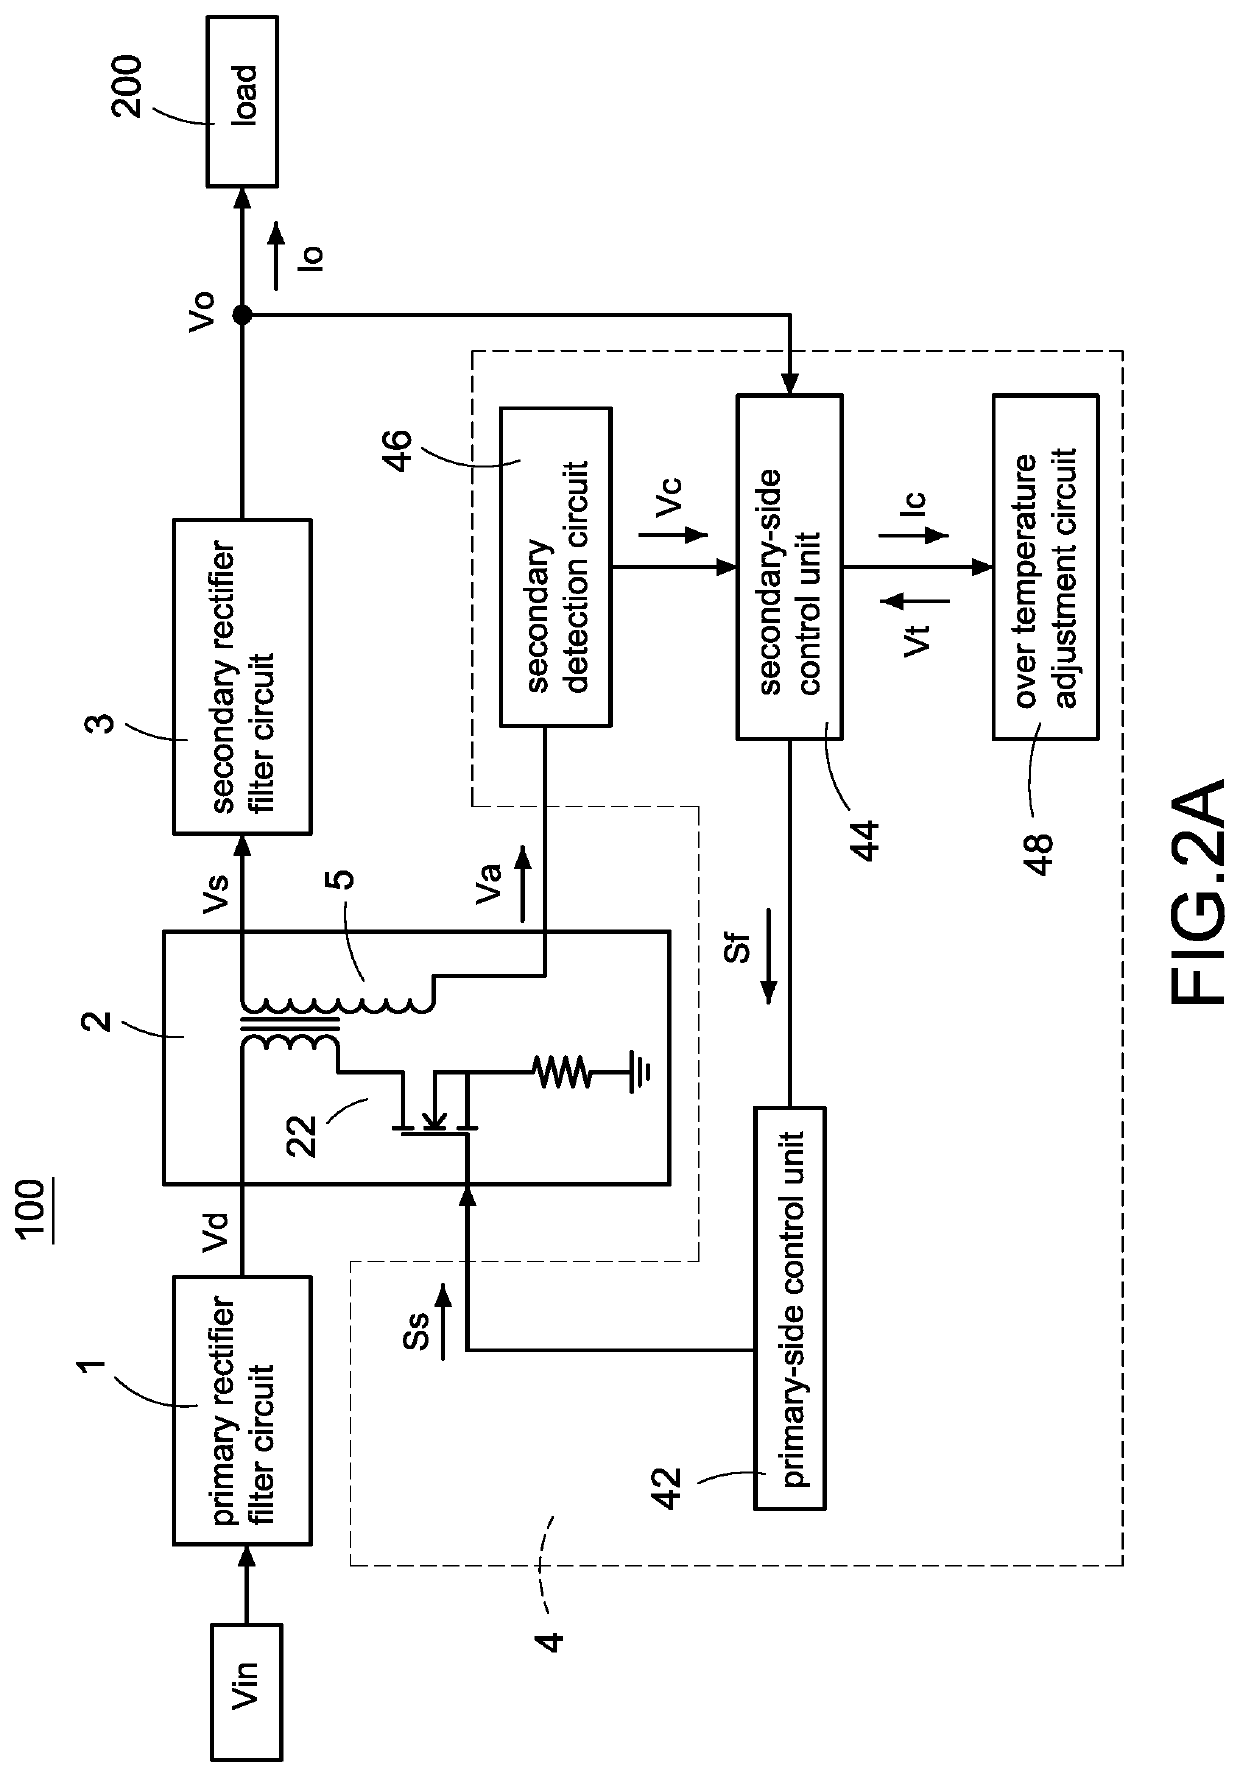 Power converter with over temperature protection compensation